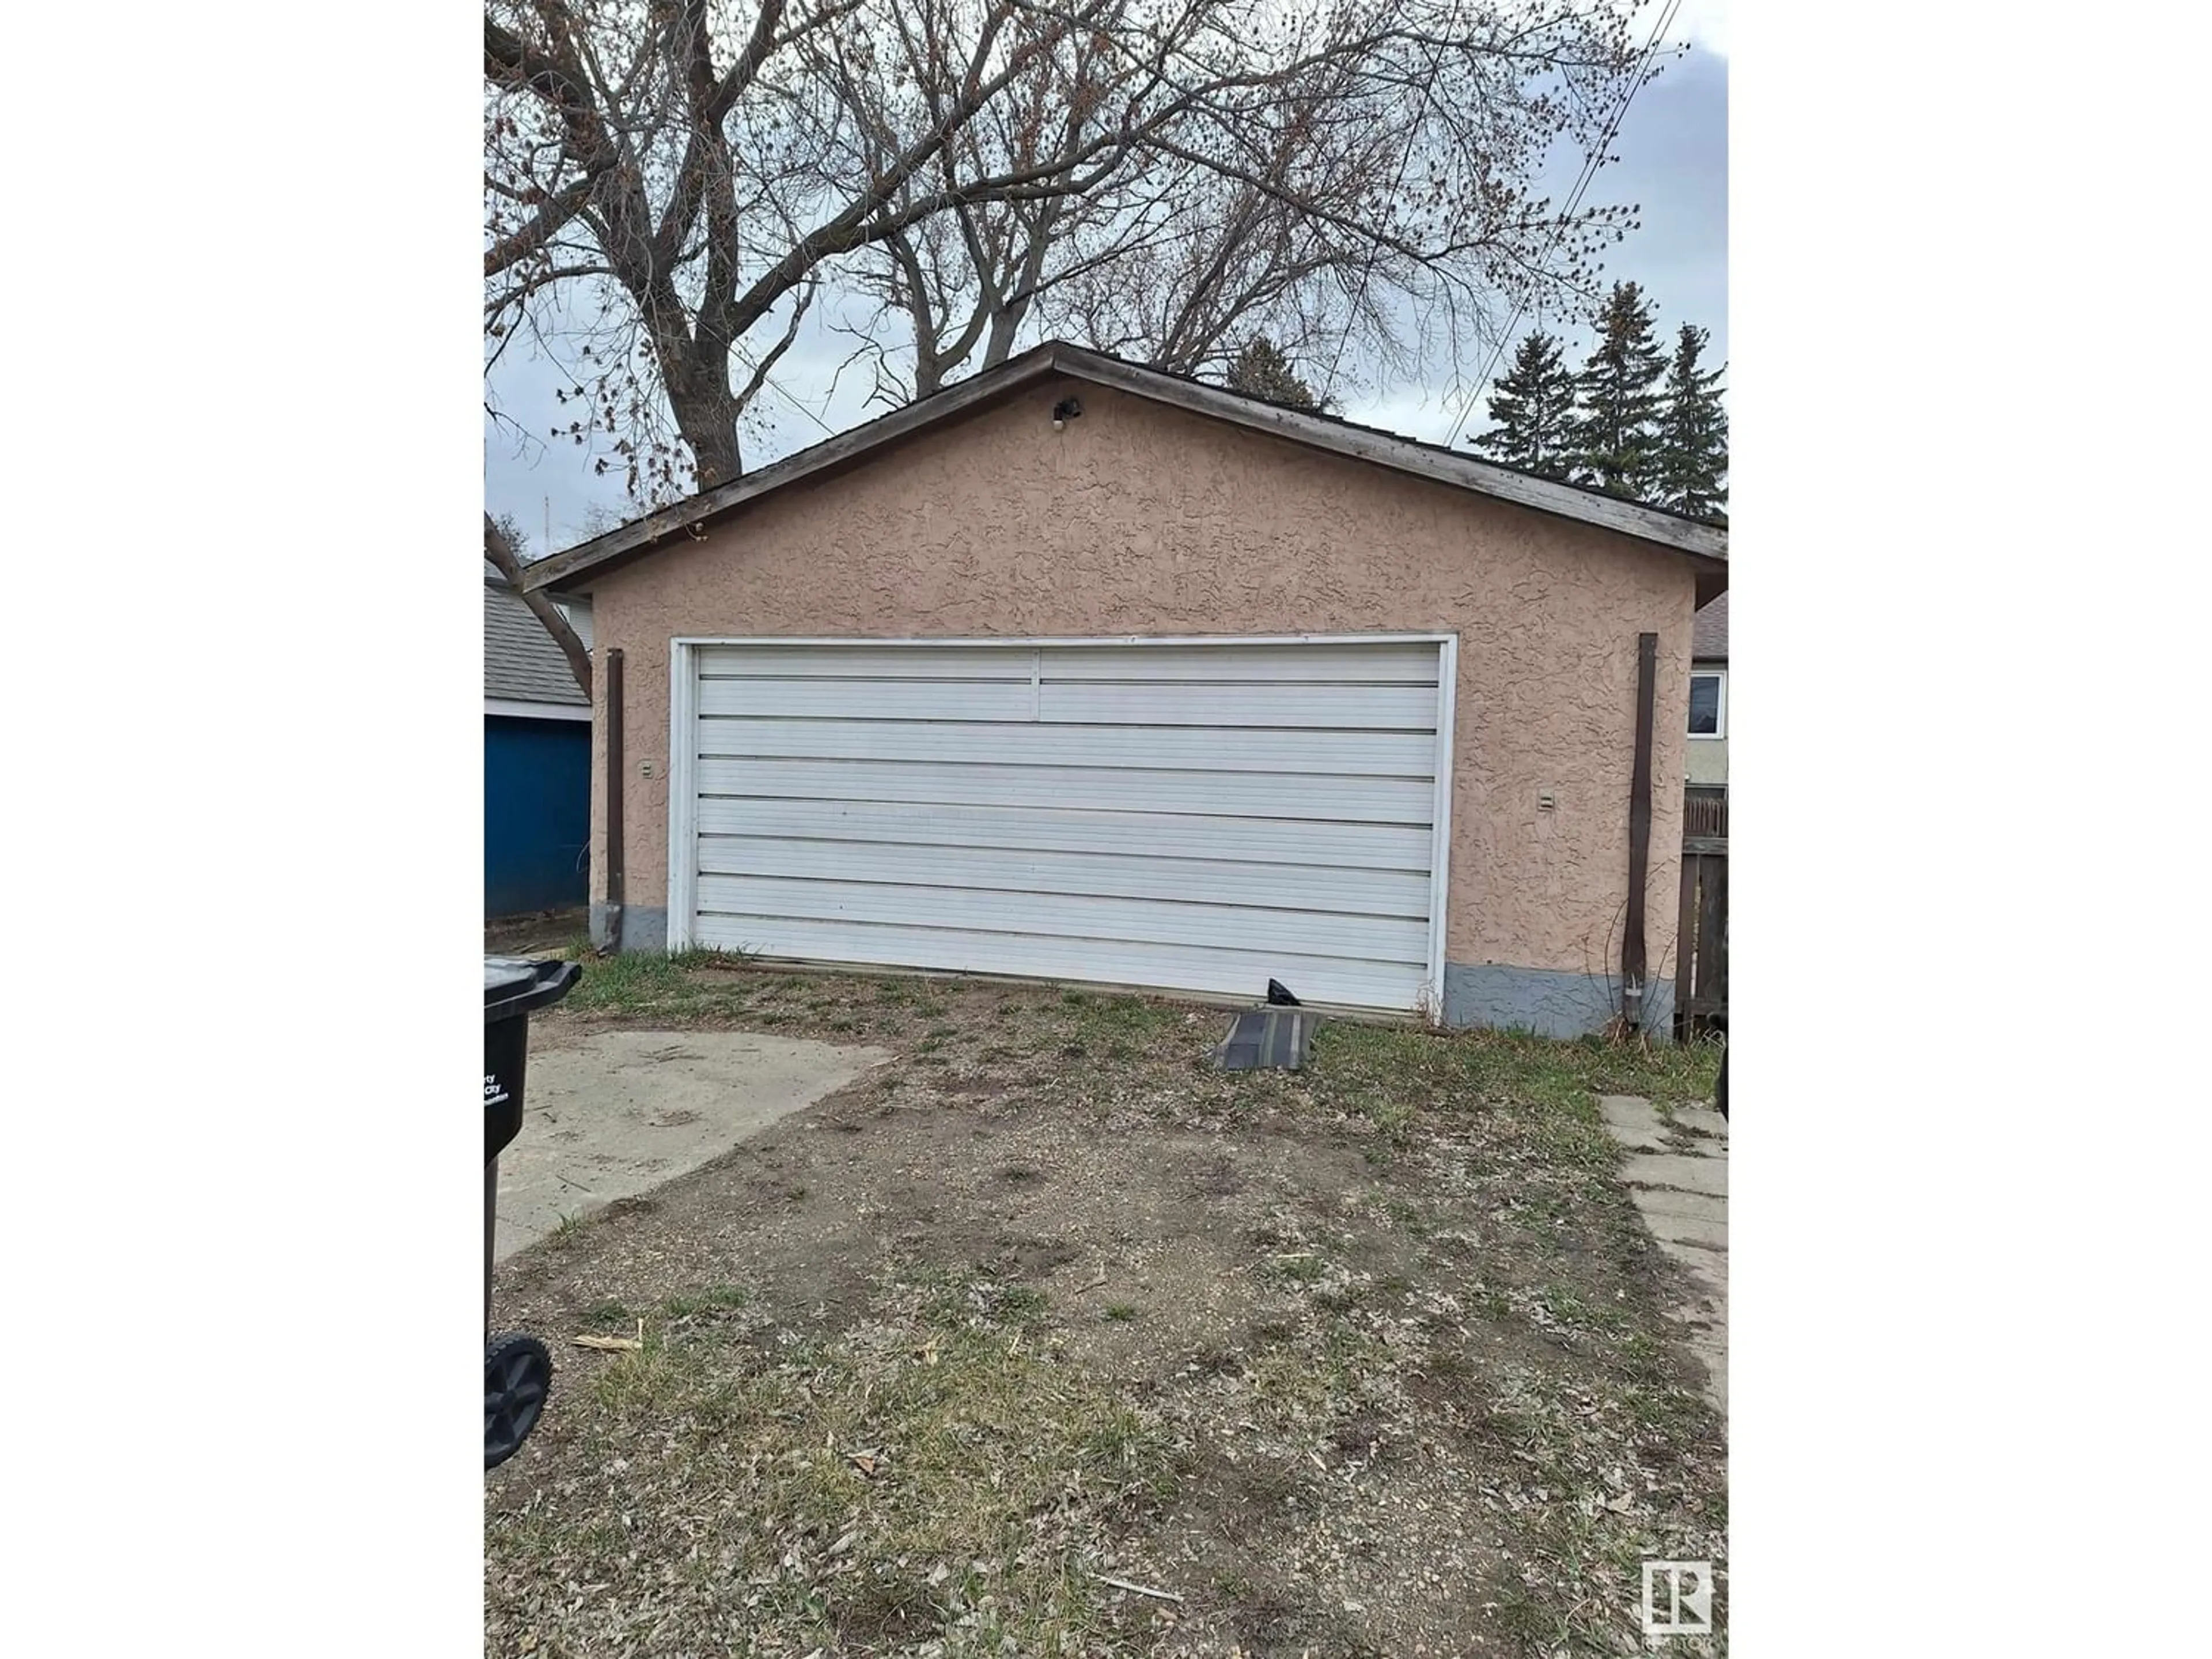 Frontside or backside of a home for 12723 116 ST NW, Edmonton Alberta T5E5H1